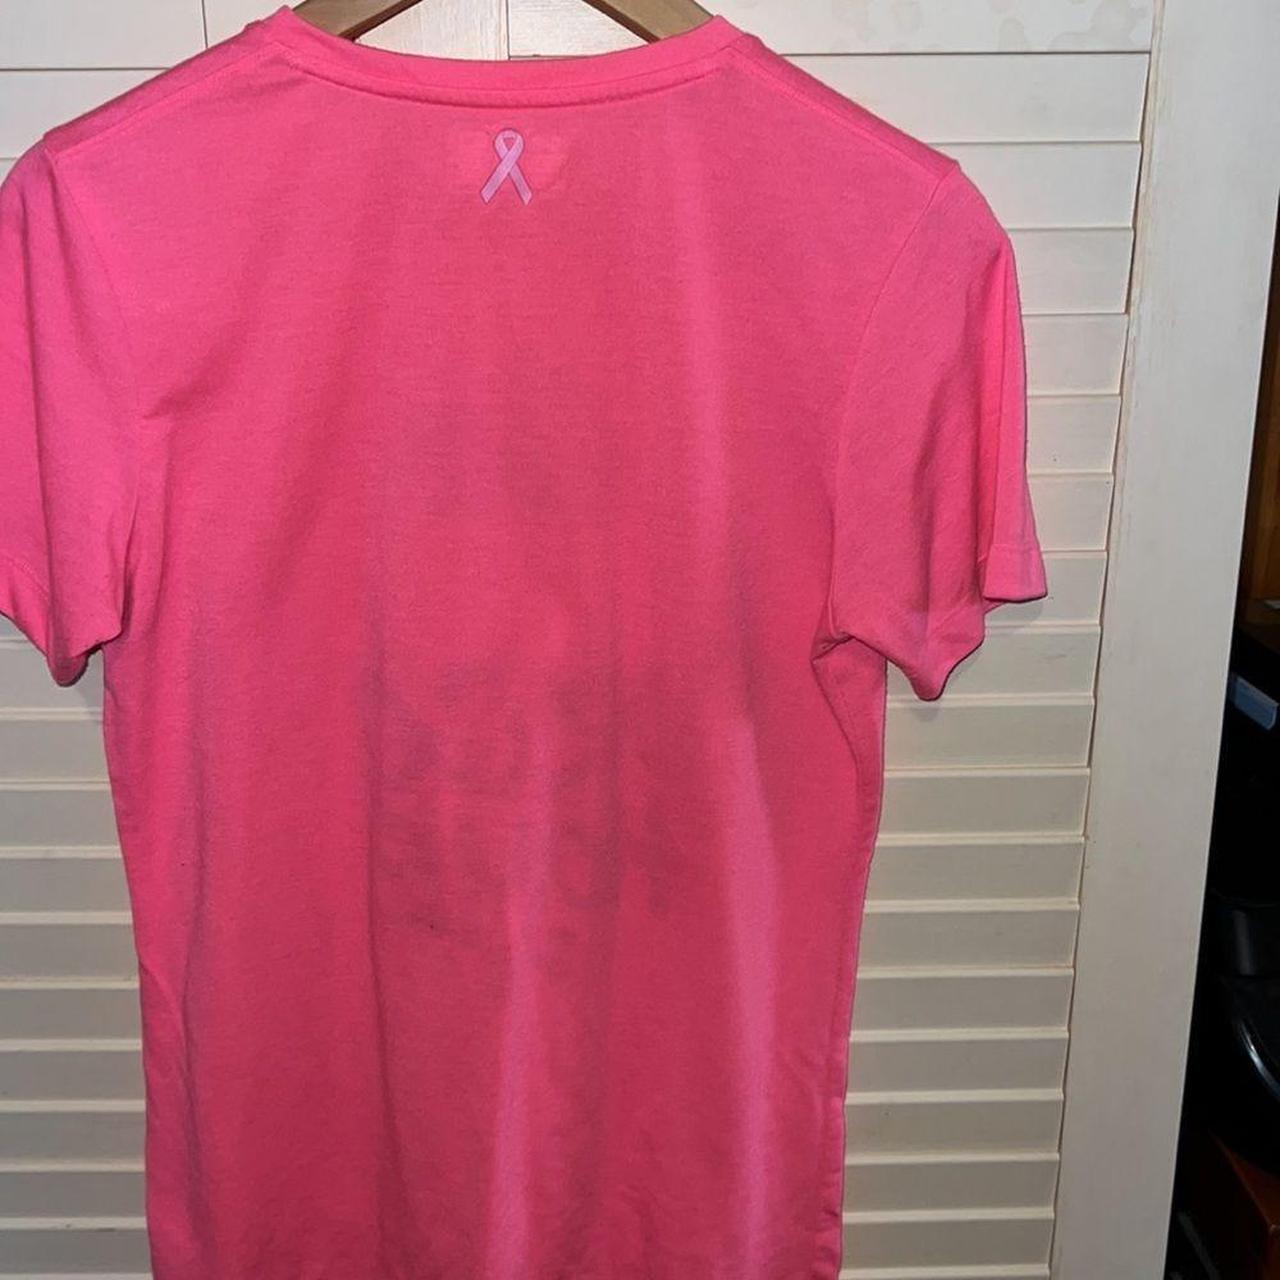 Under Armour Womens XS Semi-Fitted Heat Gear T-shirt Gray/Pink Breast Cancer